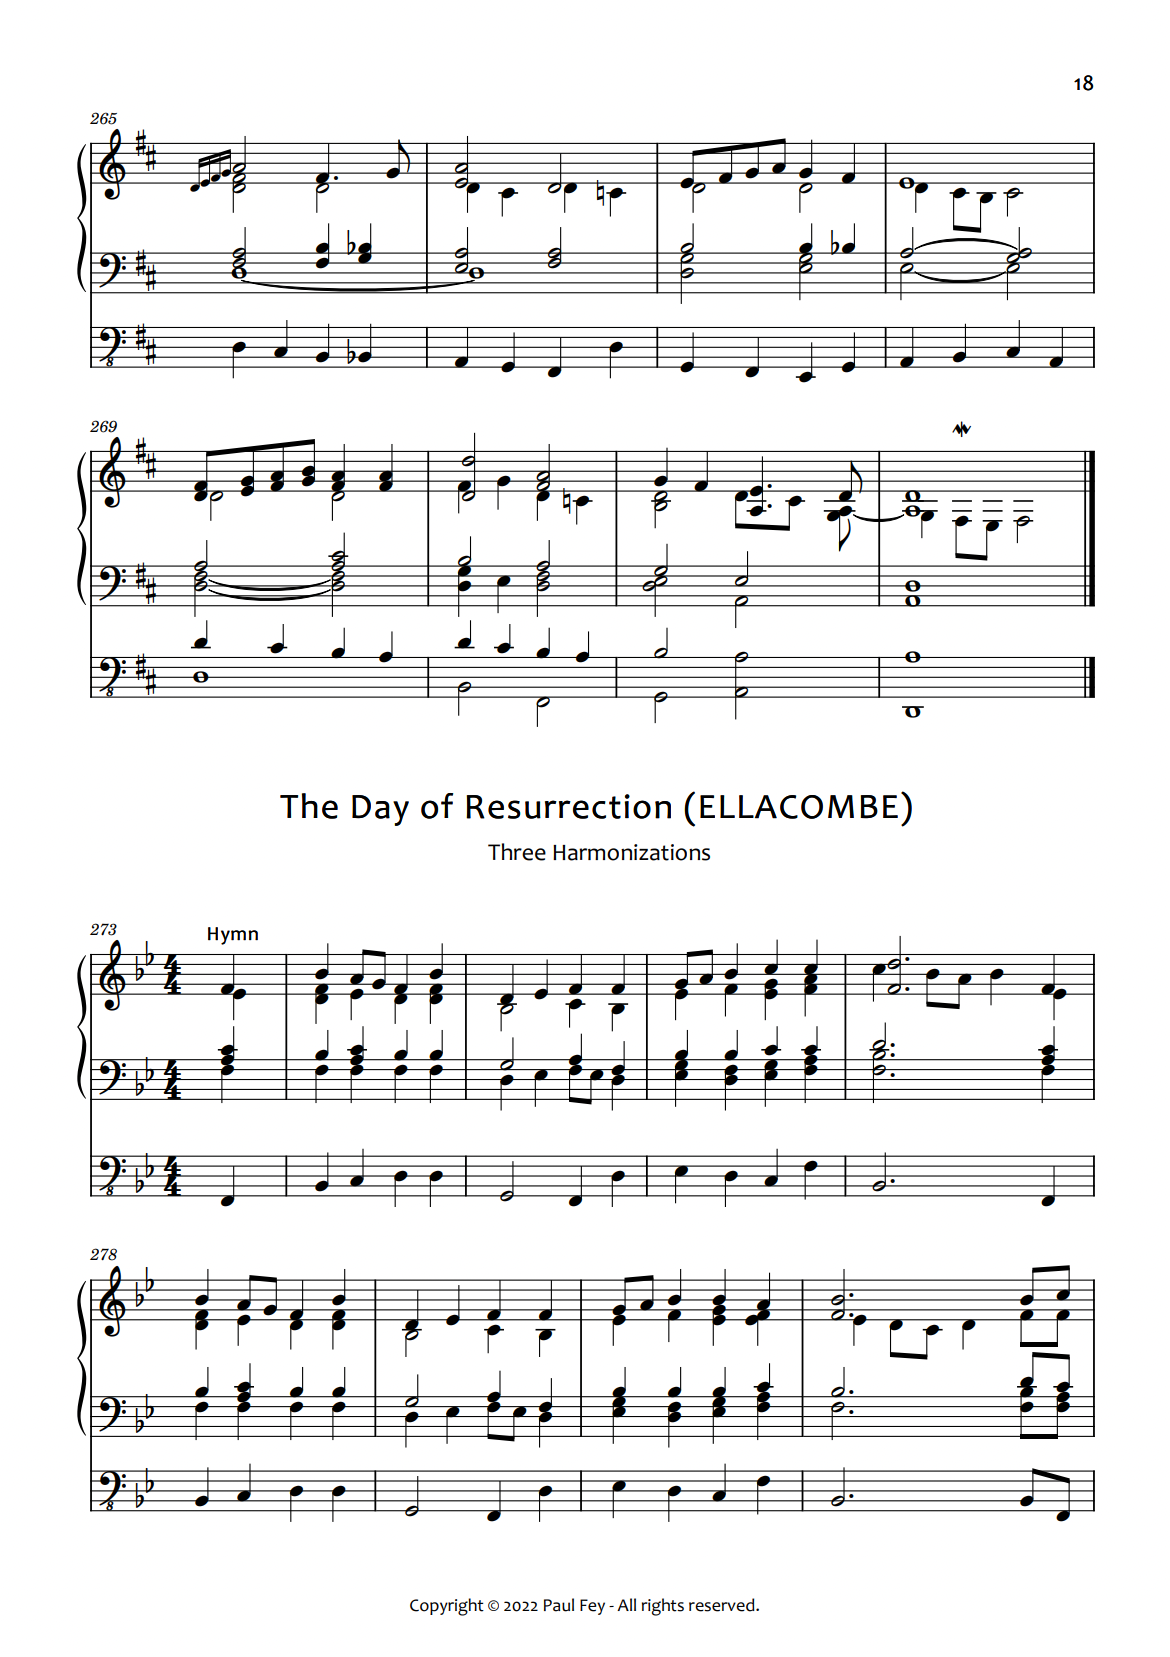 The Day of Resurrection (Ellacombe) Music Sheet Pipe Organ by Paul Fey